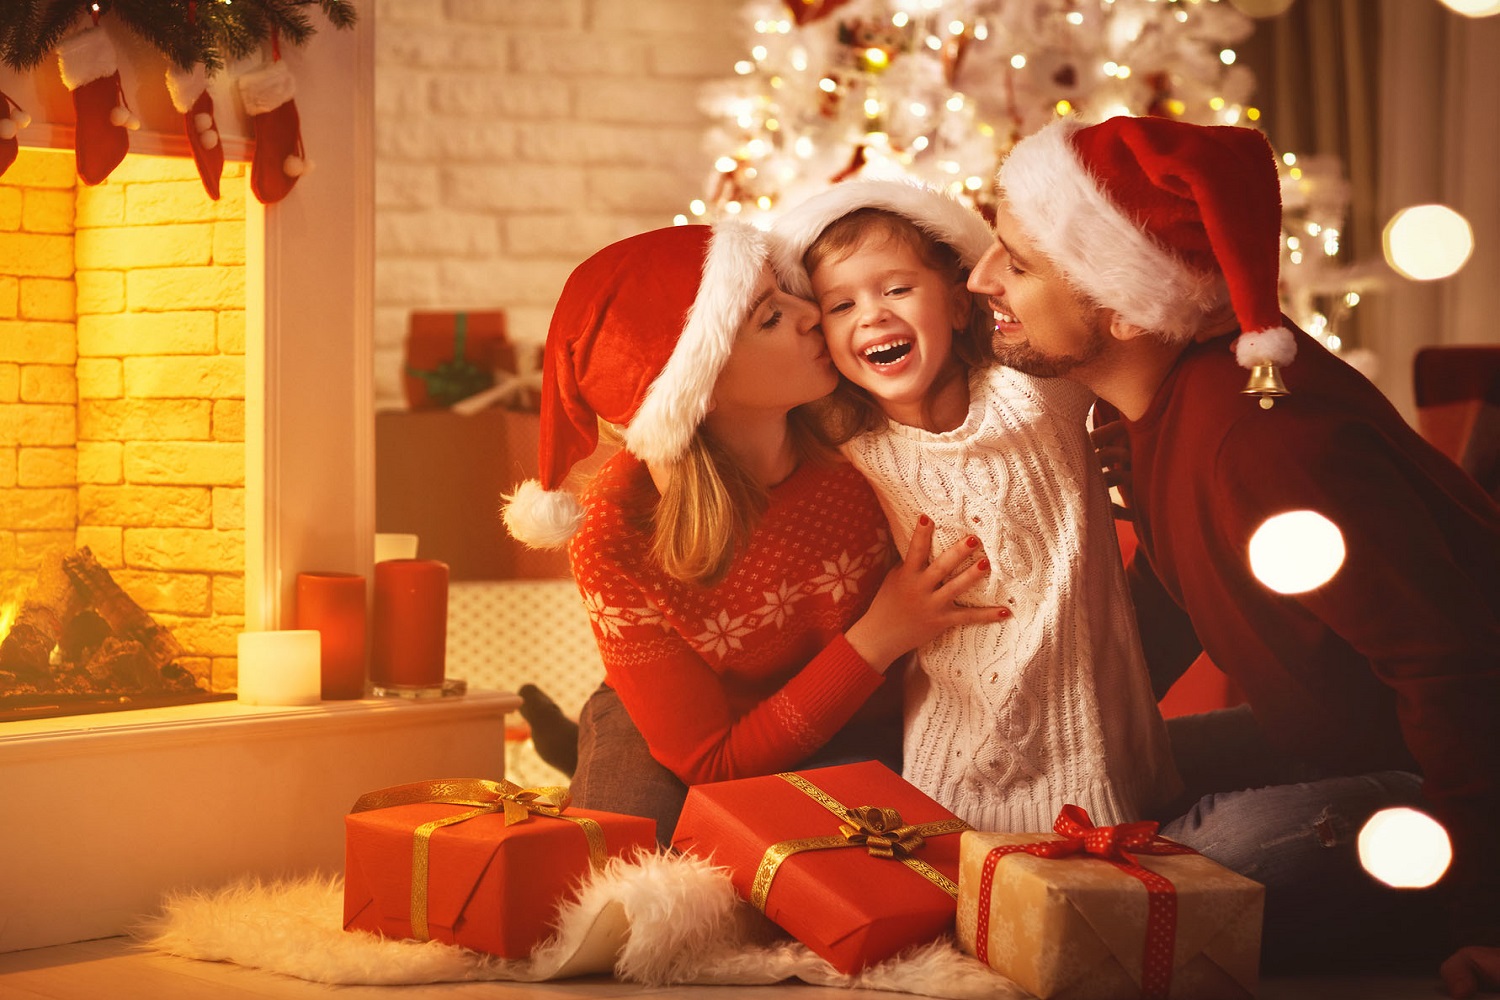 Christmas Celebration Ideas with Colleagues, Kids, Adults, Family